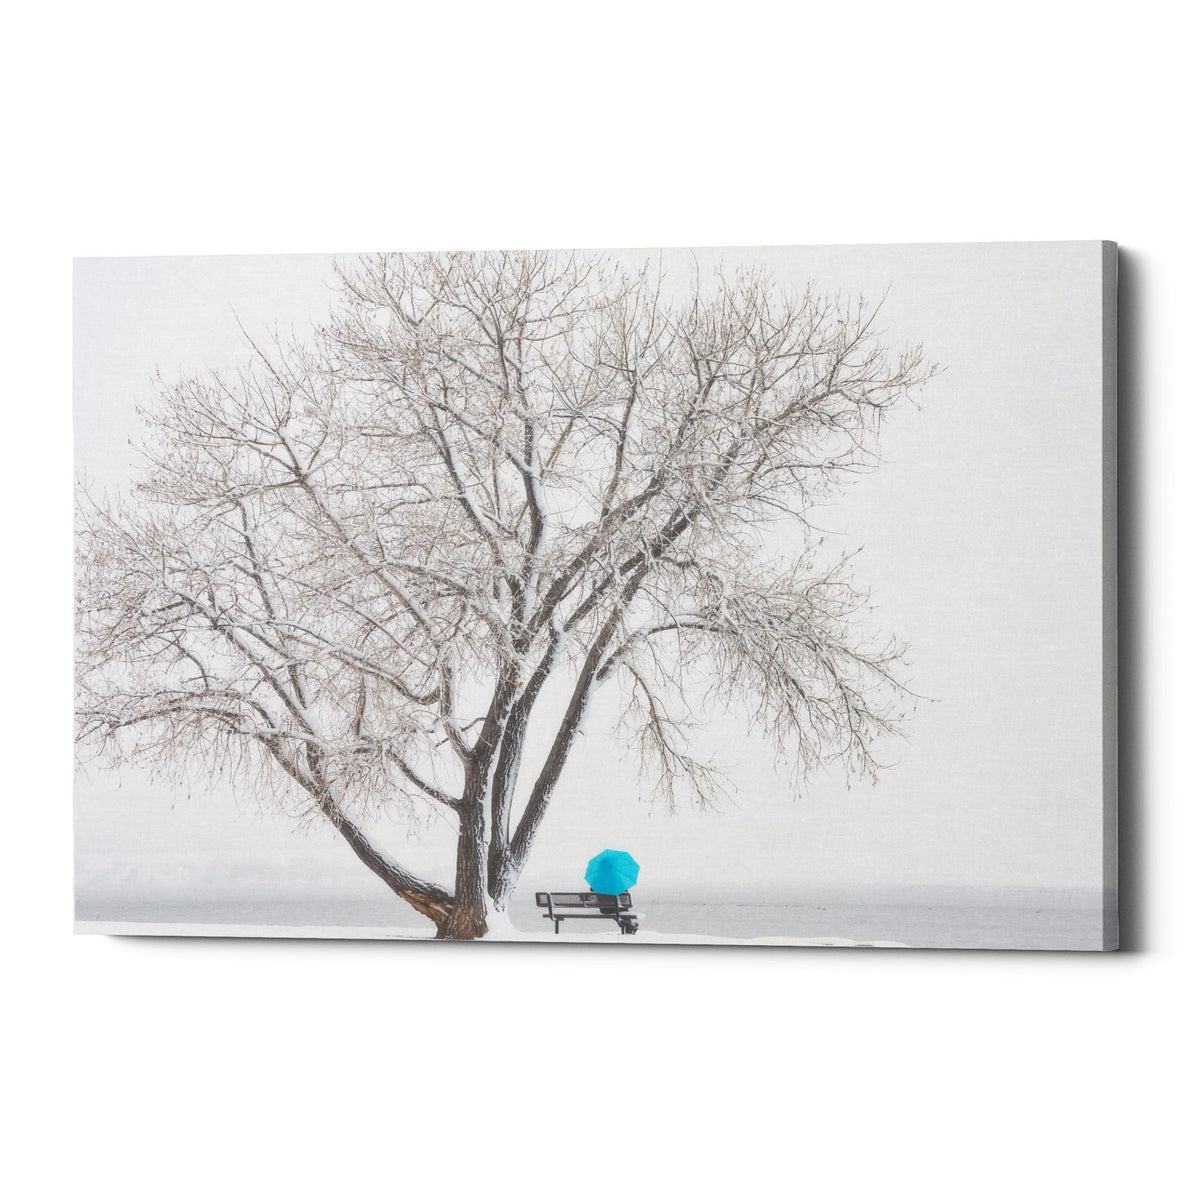 Epic Graffiti &quot;Another Winter Alone&quot; by Darren White, Giclee Canvas Wall Art